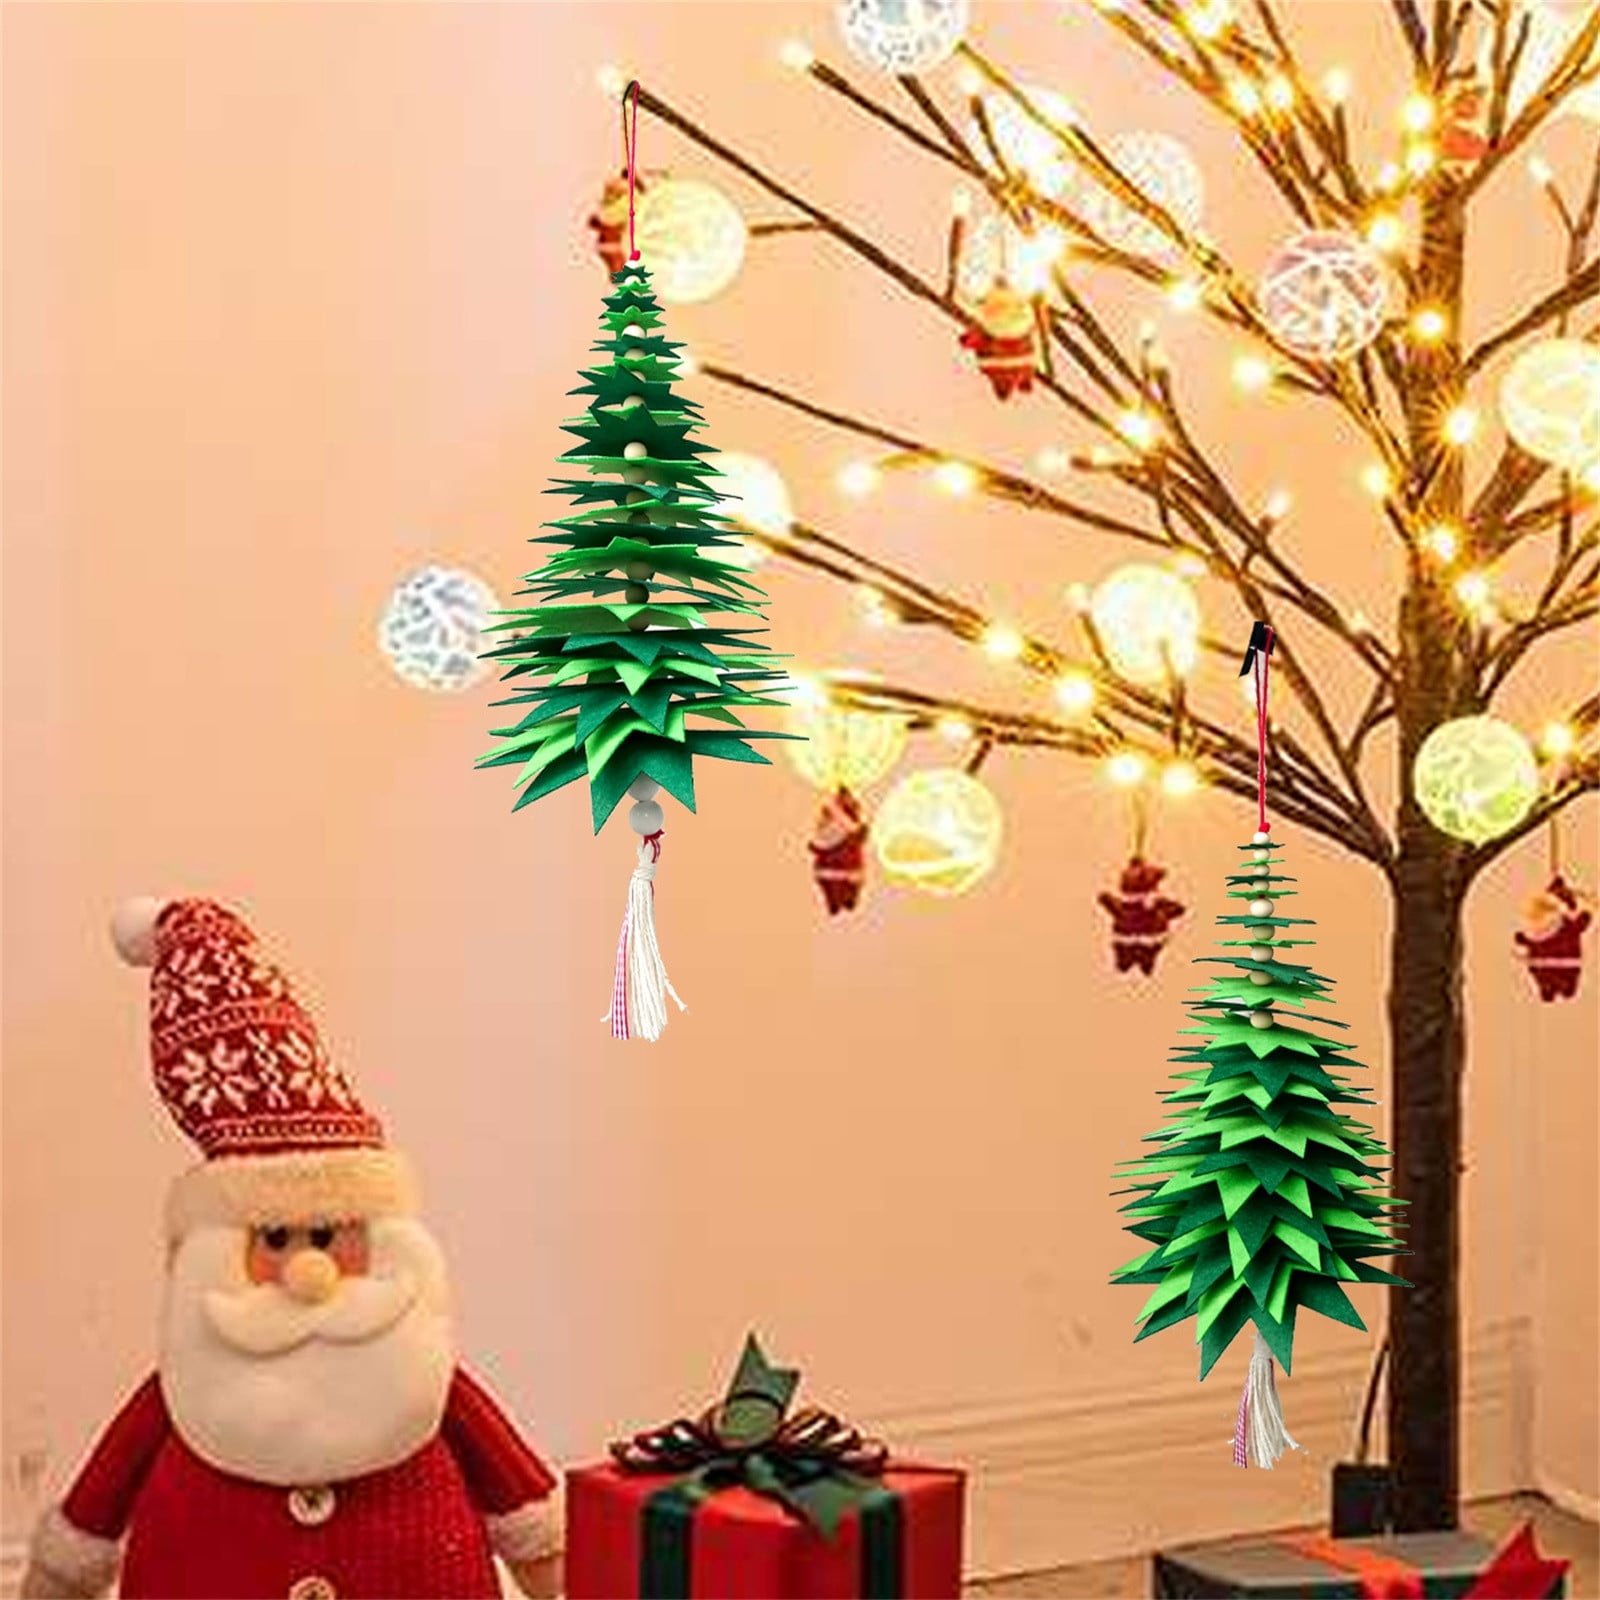 Rbckvxz Christmas Decorations Under Clearance, Christmas Tree Ornaments Christmas Gifts Bedroom Living Room Decoration Pendants, Christmas